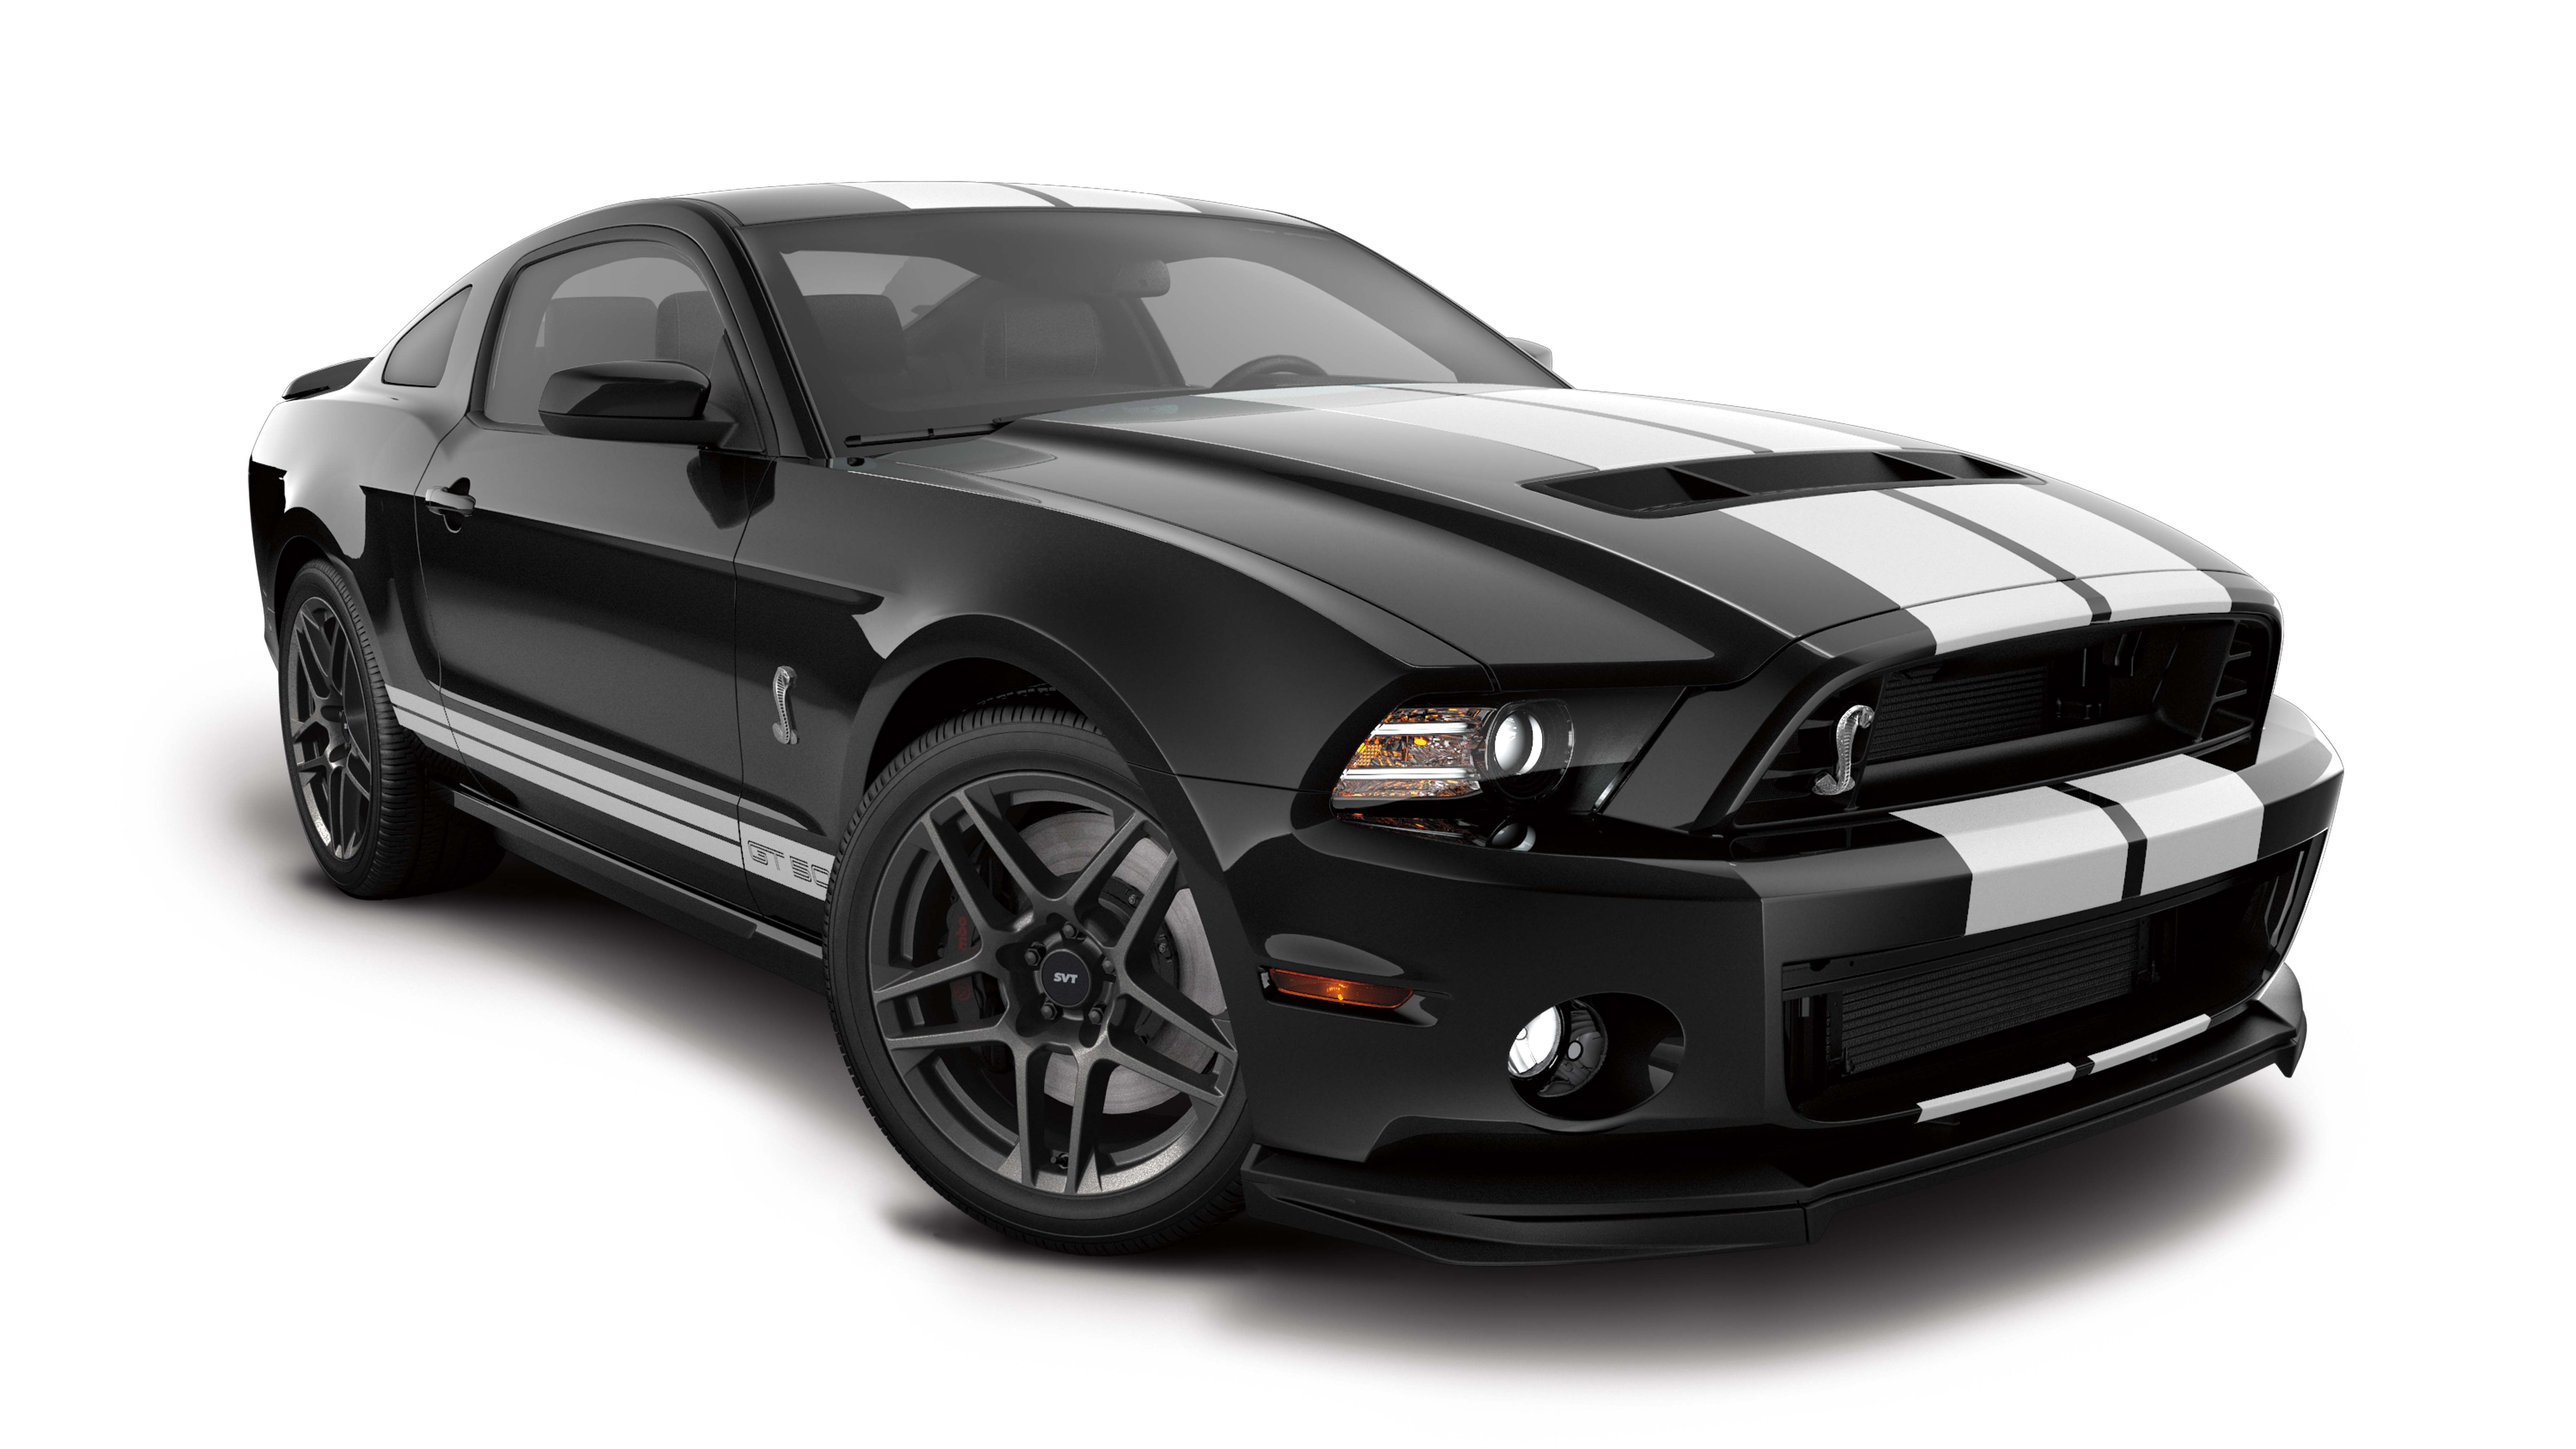 Ford Mustang Shelby GT500 HD Wallpaper